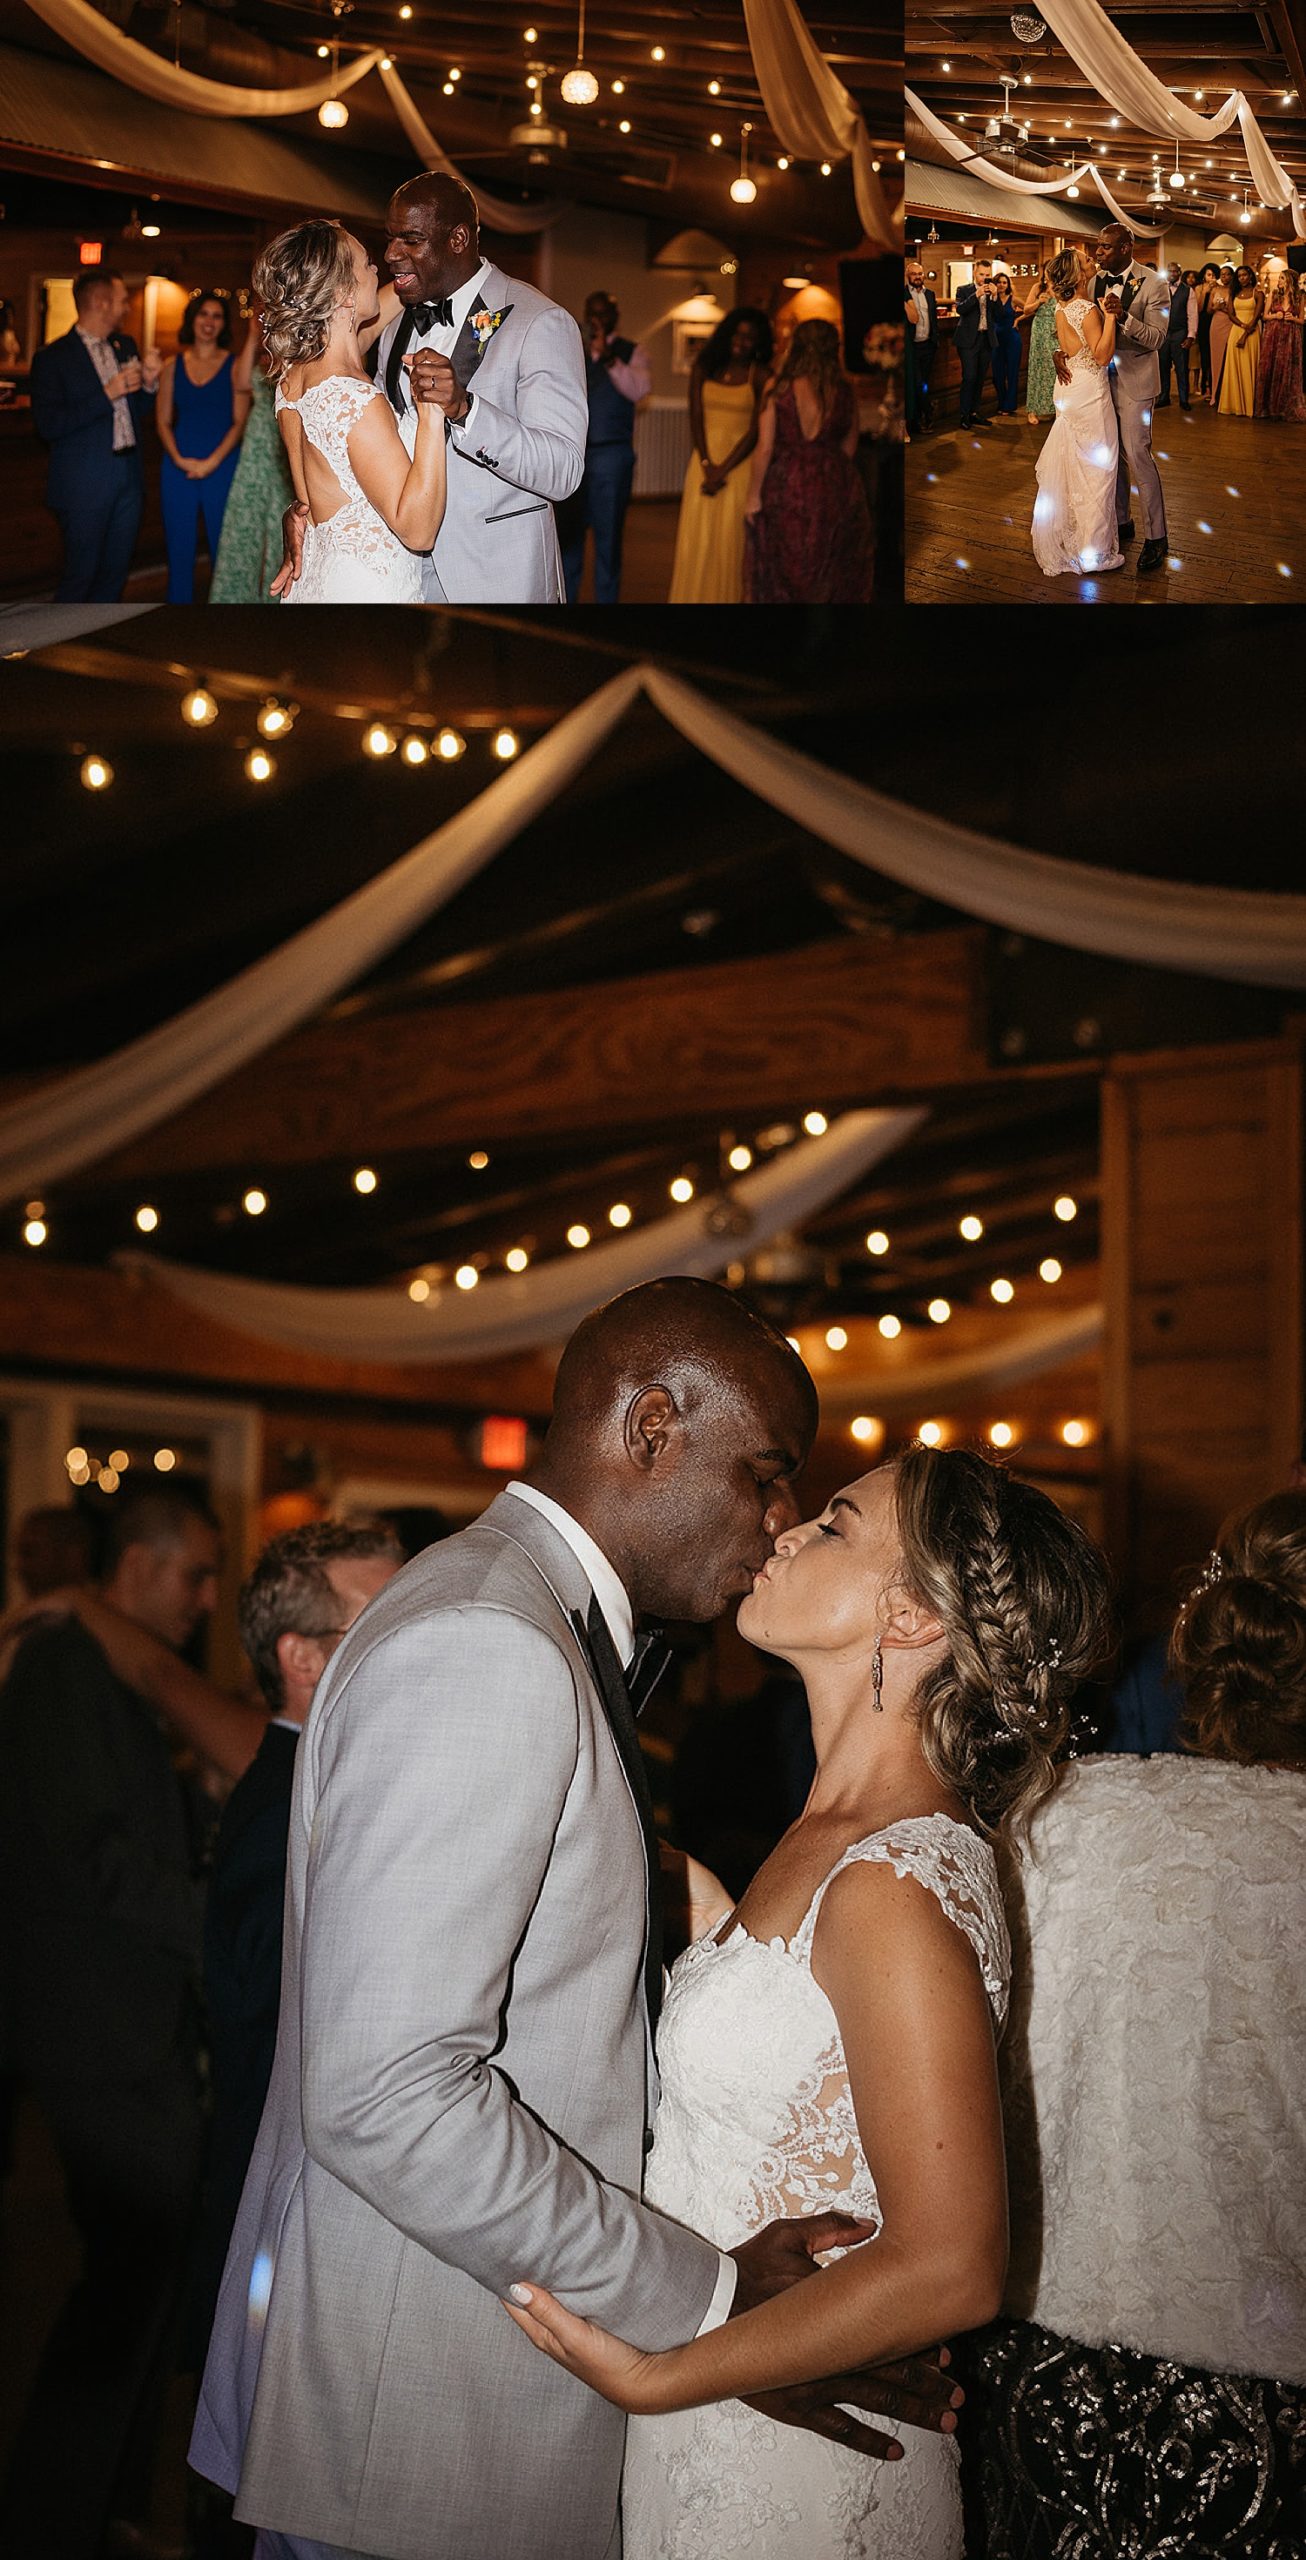 Bride and groom share first dance at wedding reception at Fort Walton Beach Wedding